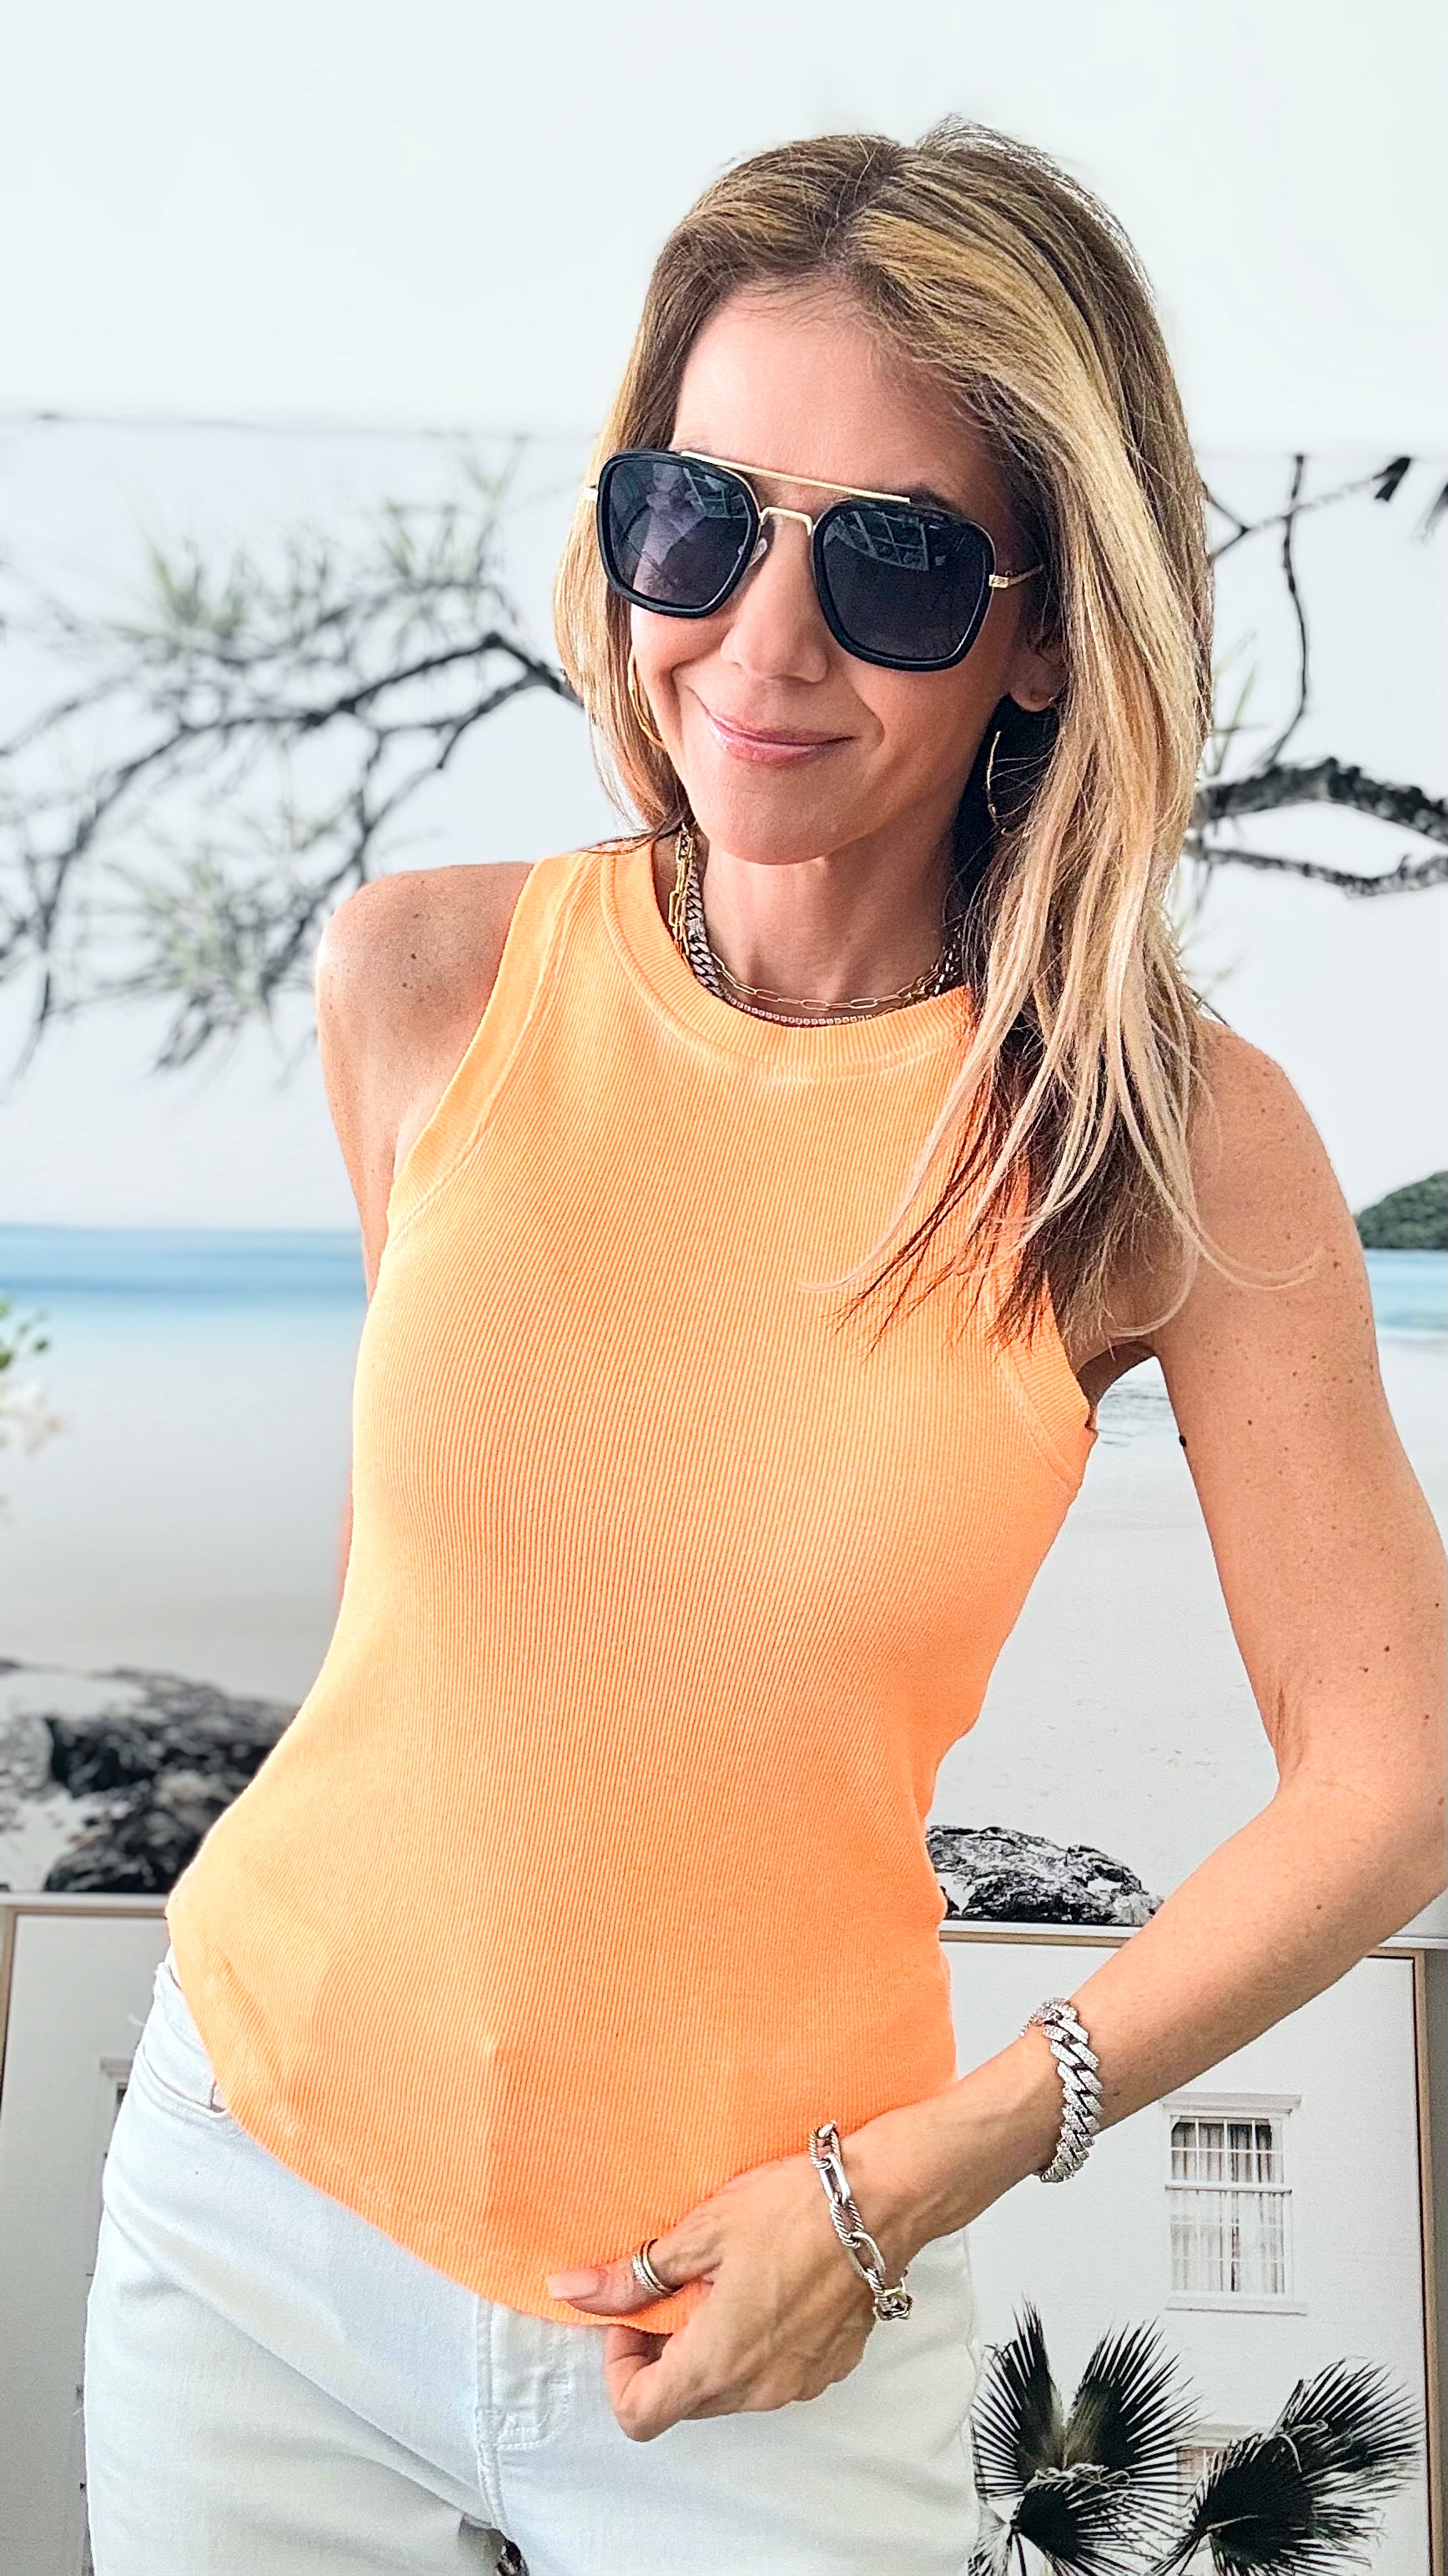 Sunburst Glow Italian Tank - Neon Orange - DAMAGED-100 Sleeveless Tops-Germany-Coastal Bloom Boutique, find the trendiest versions of the popular styles and looks Located in Indialantic, FL